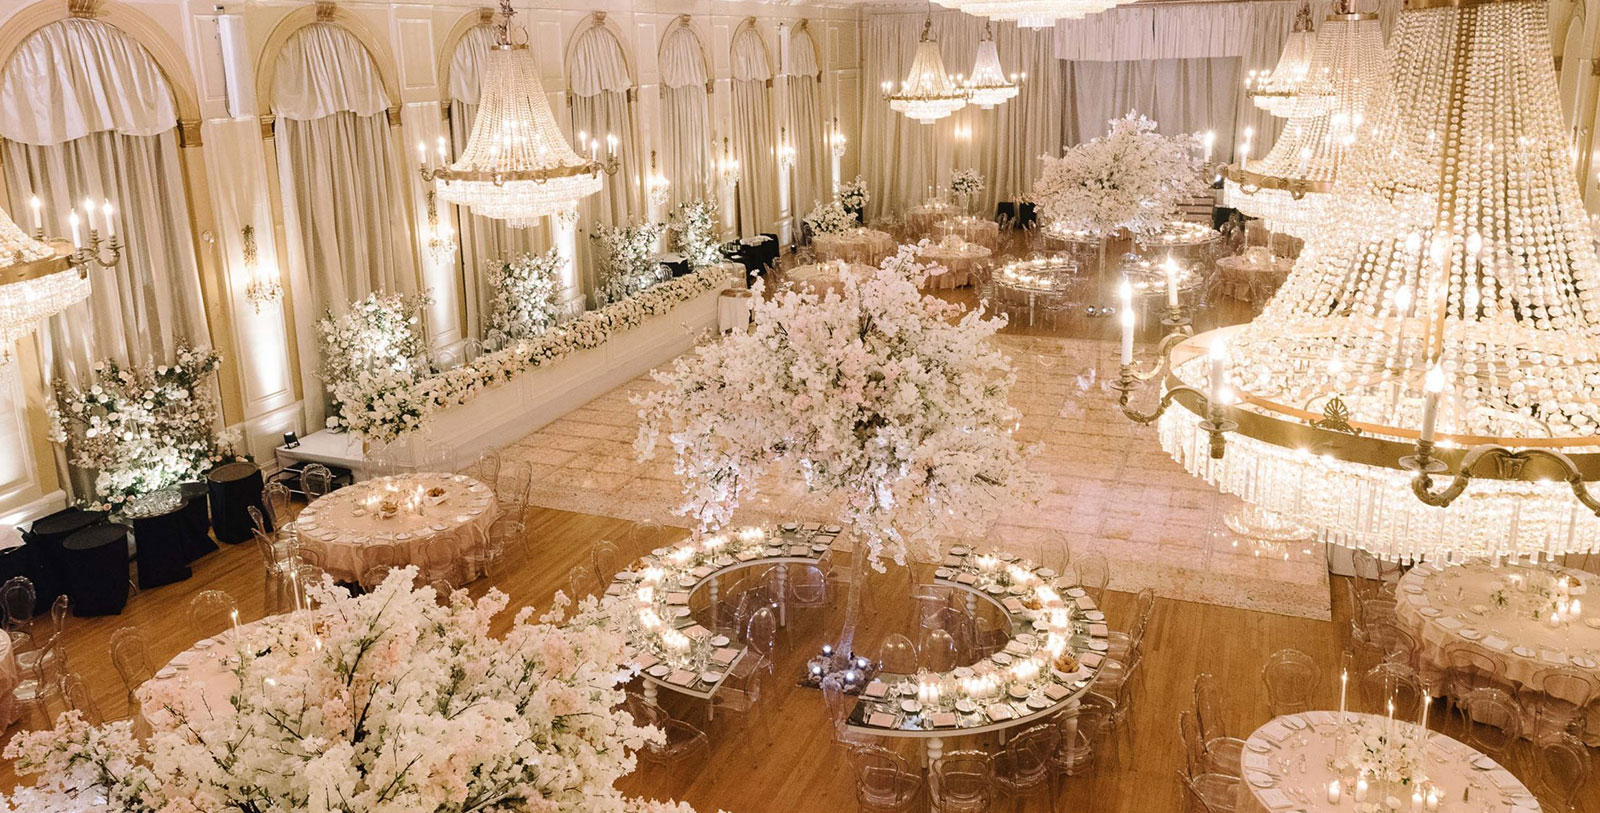 Image of Event Space set up for Weddings, Fairmont Royal York, 1929, Member of Historic Hotels Worldwide in Toronto, Canada, Weddings